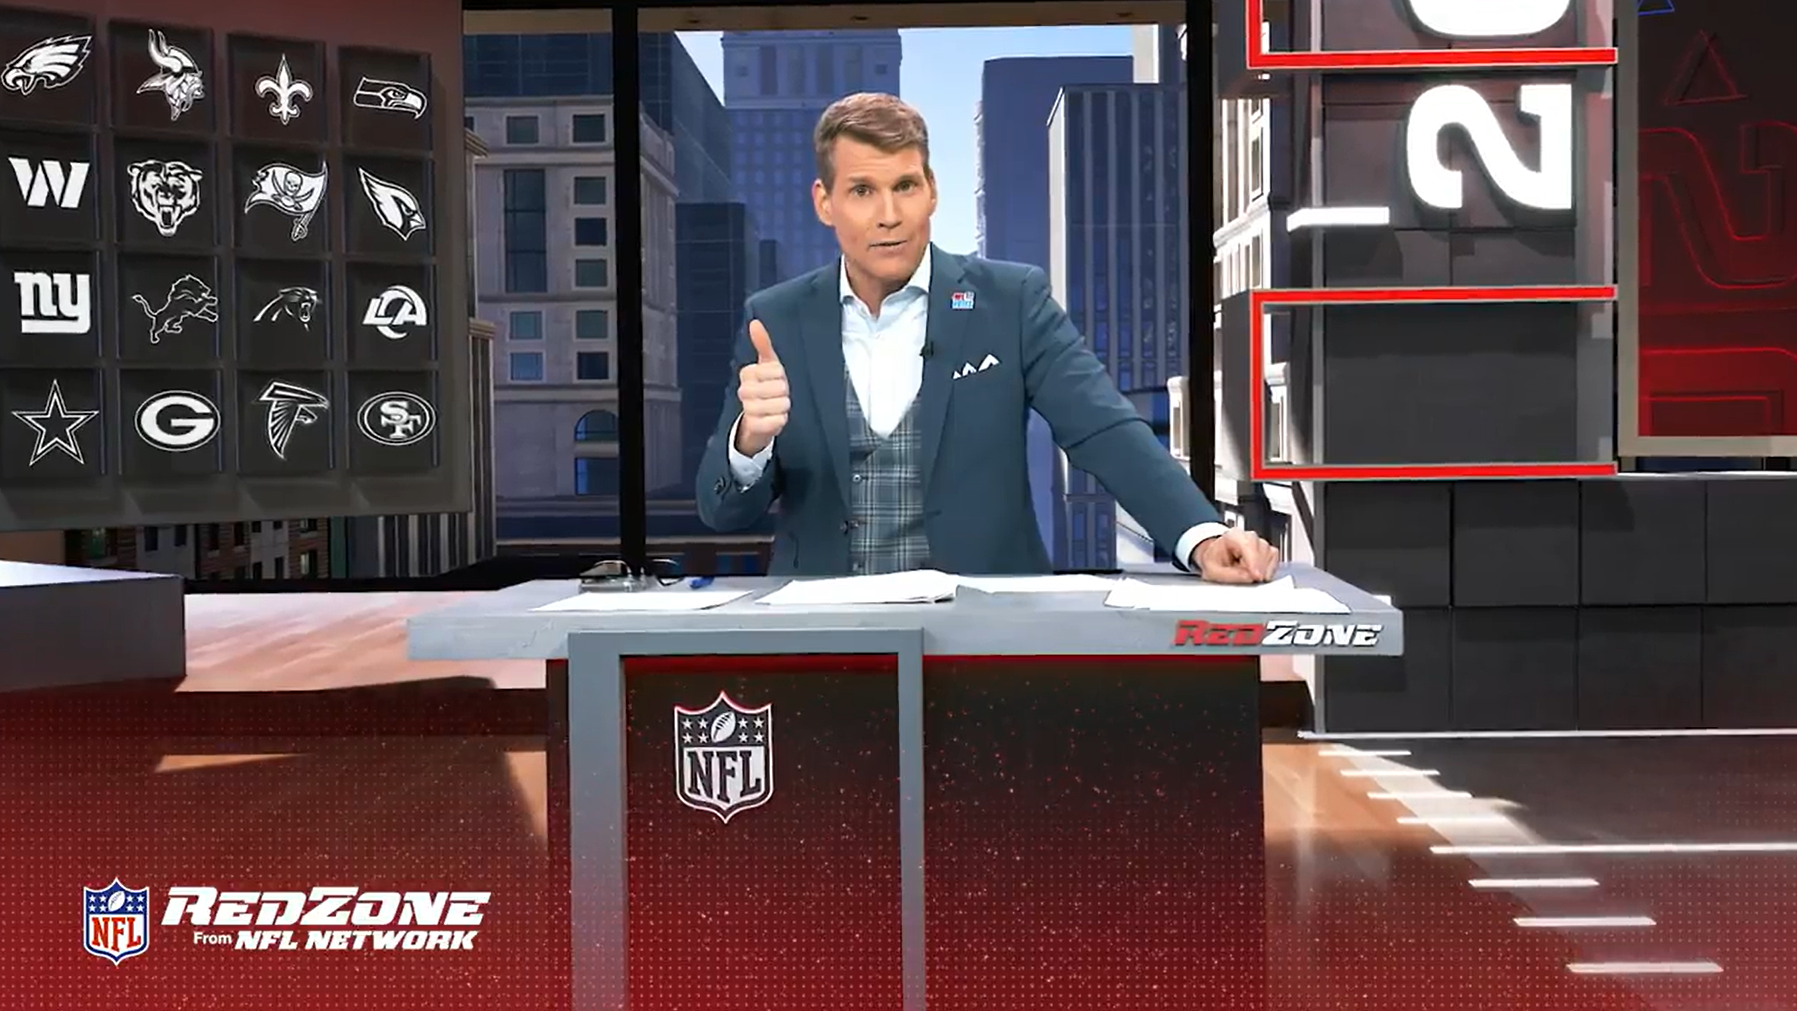 How to get NFL RedZone without cable: Pricing, features and more